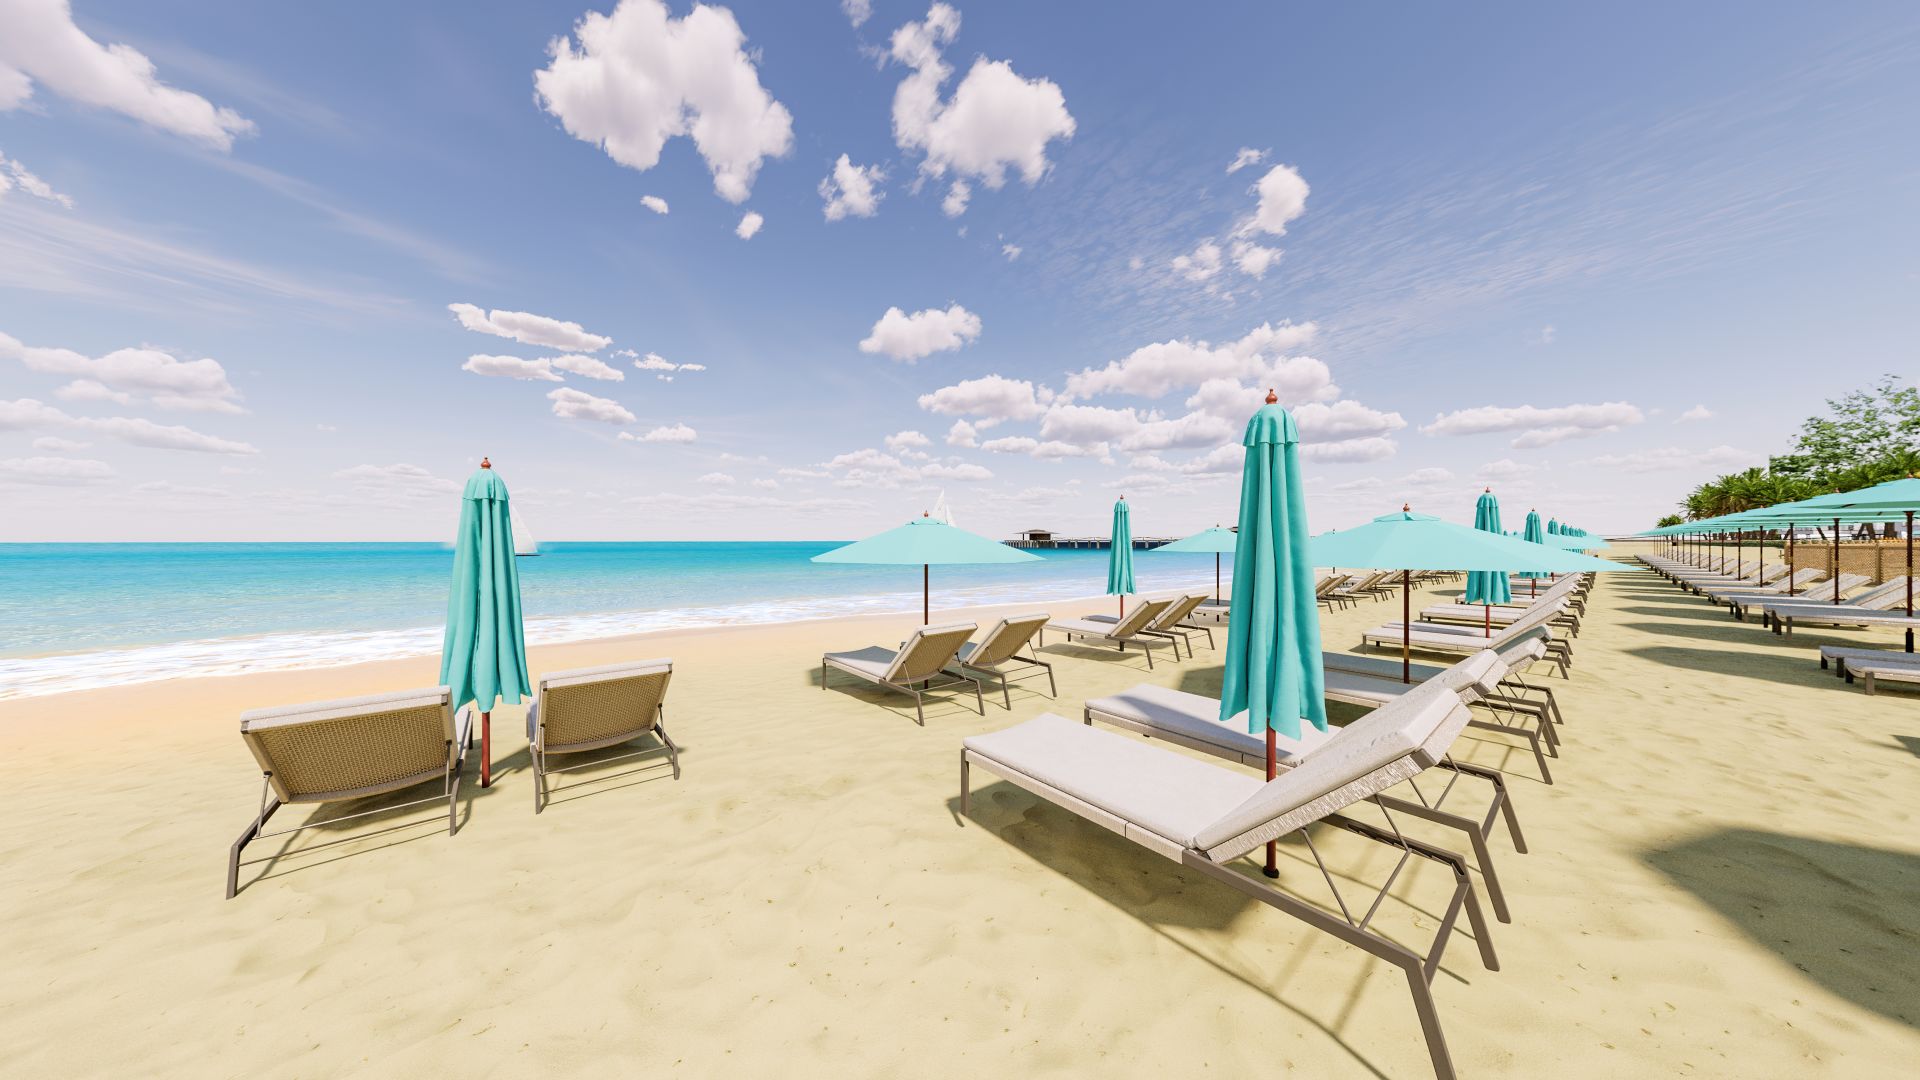 A Beach With Chairs And Umbrellas